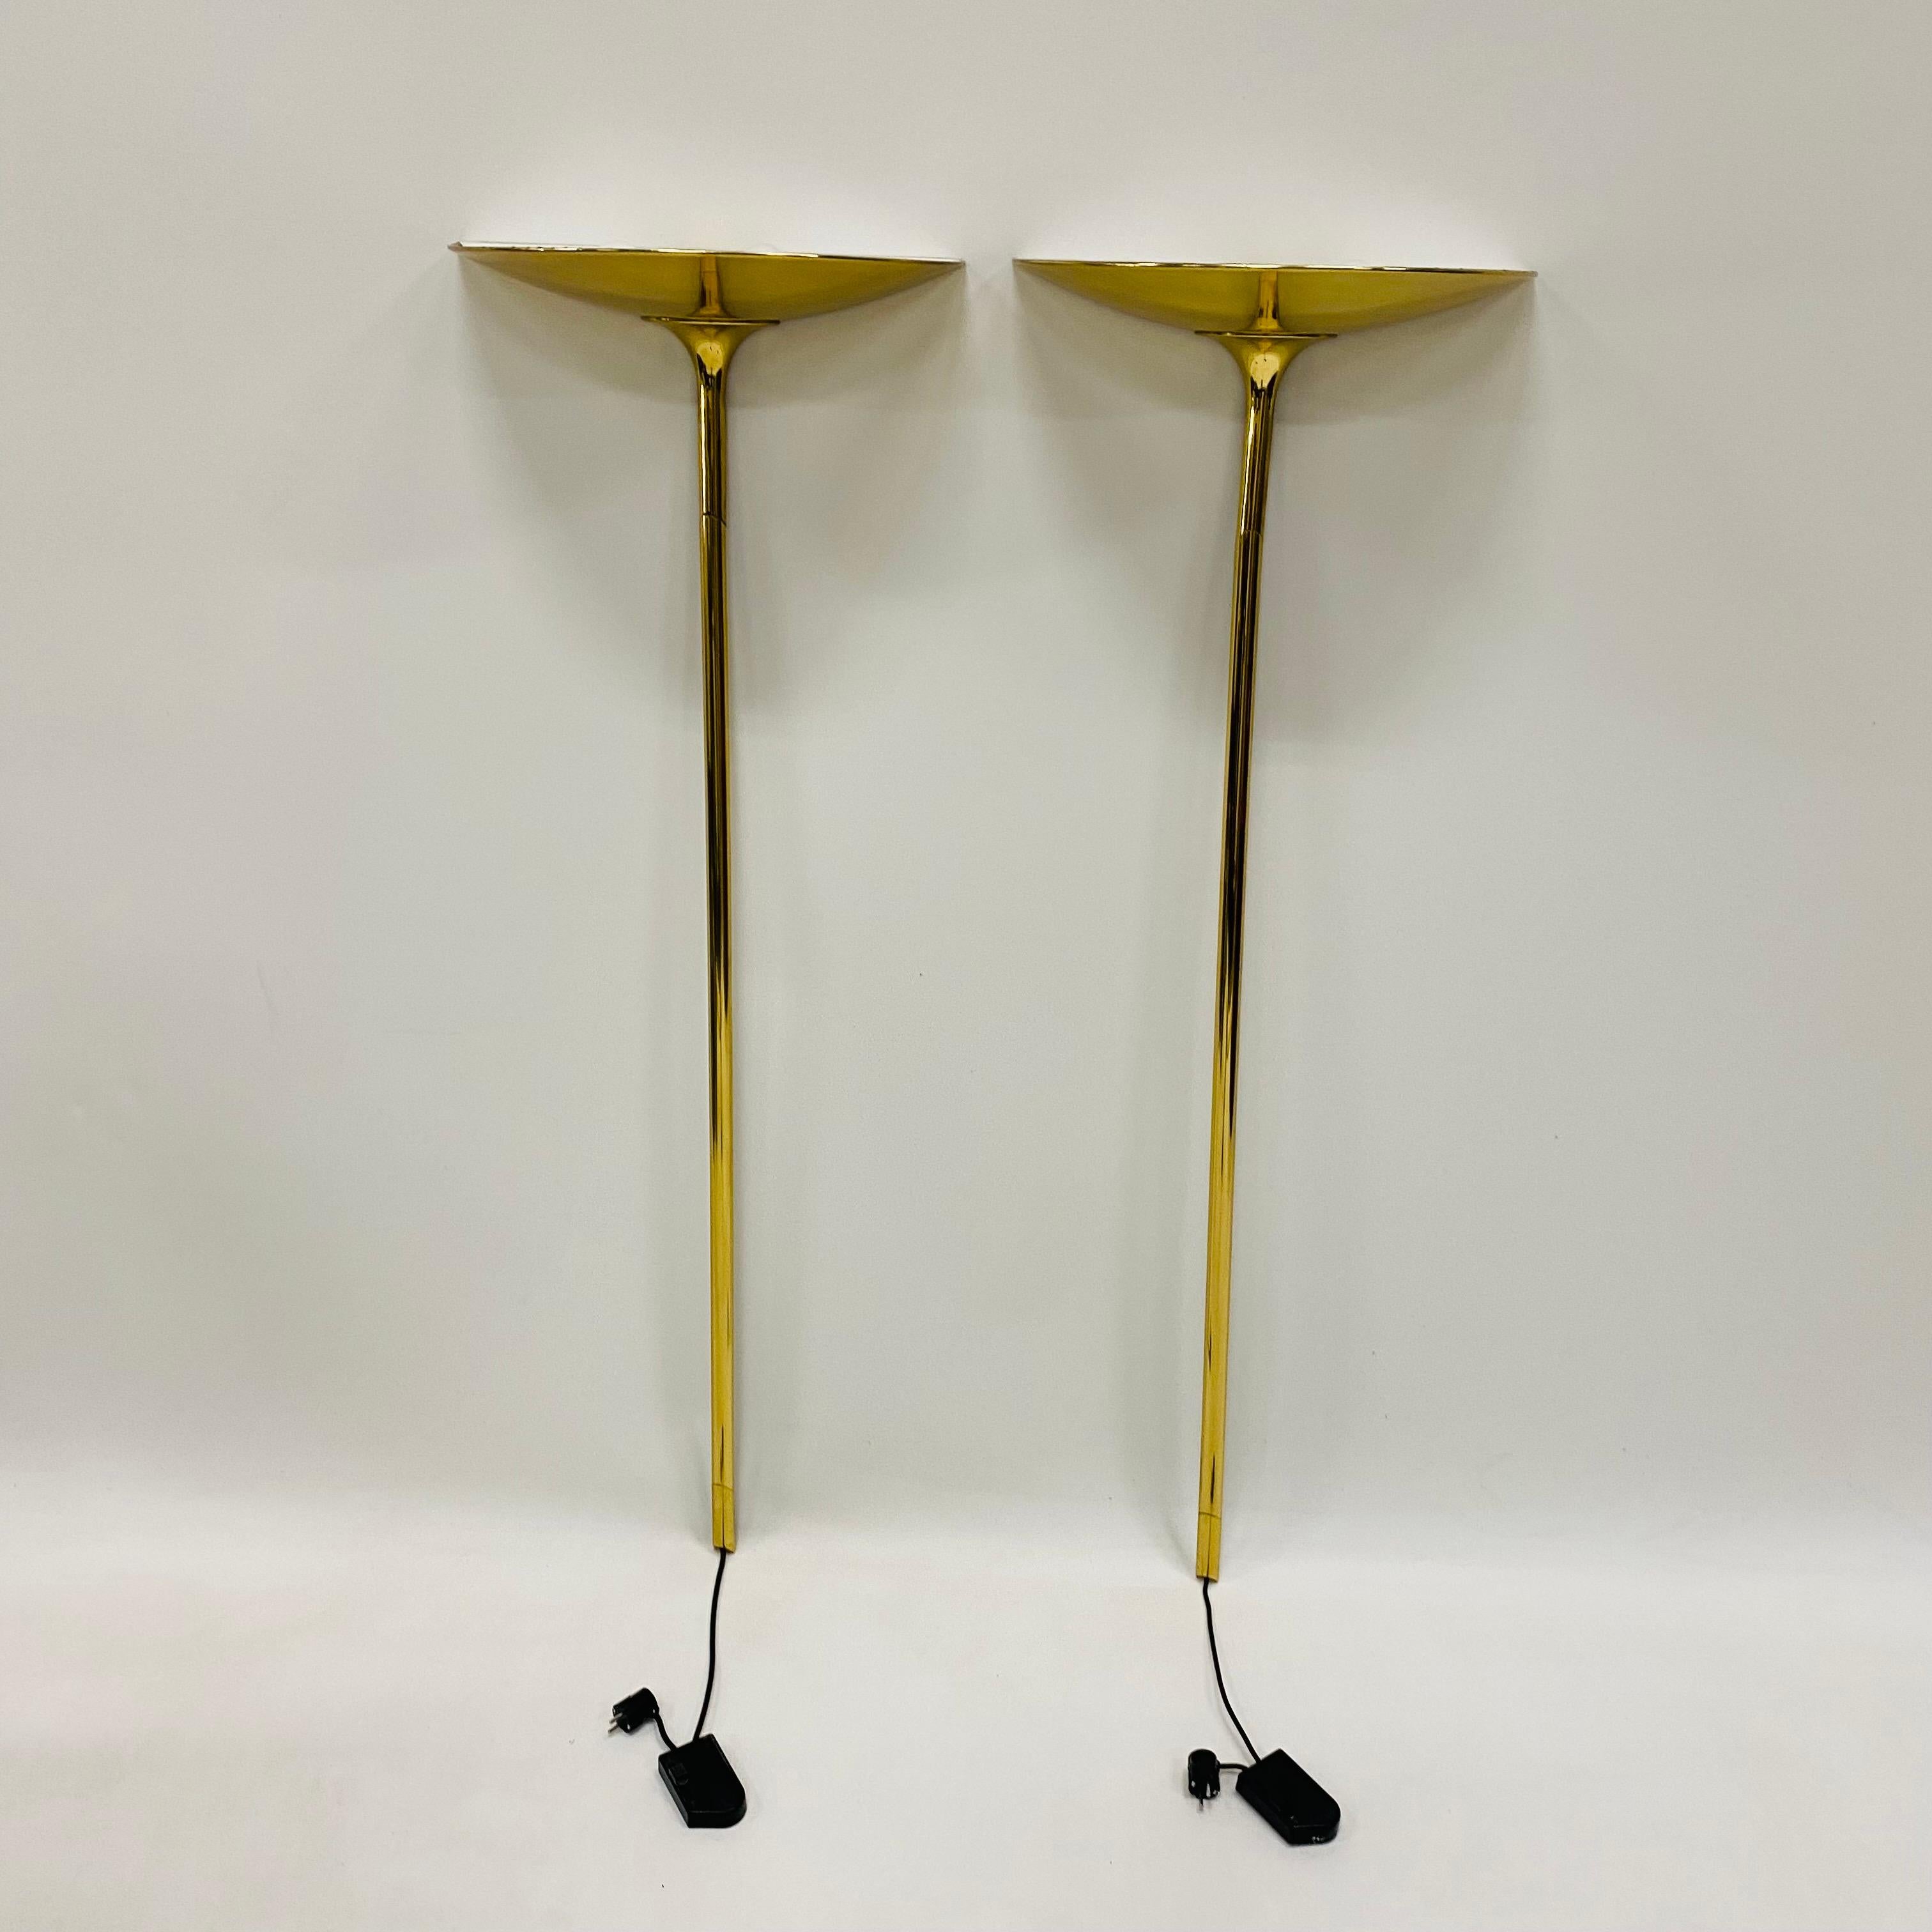 Introducing the Set of 2 Brass Wall Uplights by renowned designer Florian Schulz, crafted in Germany in the 1970s. With its exquisite mid-century design, this lighting fixture is perfect for elevating the ambiance of any luxurious setting, including